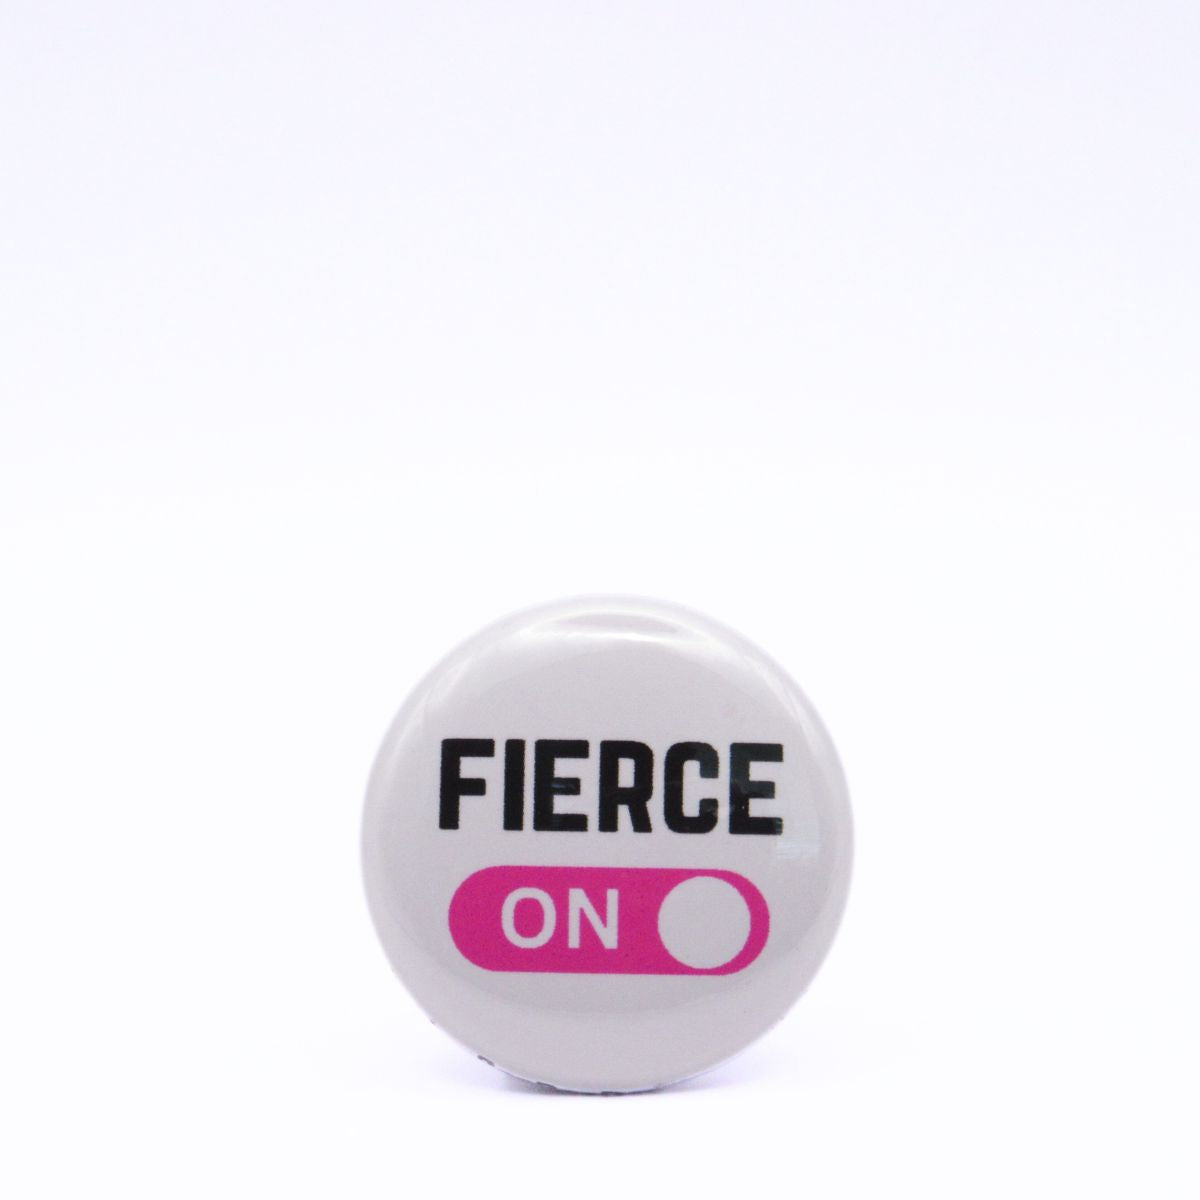 BooBooRoo Pinback Button (i.e. button, badge, pin) displaying fierce mode is on. Pink background for mode indicator.